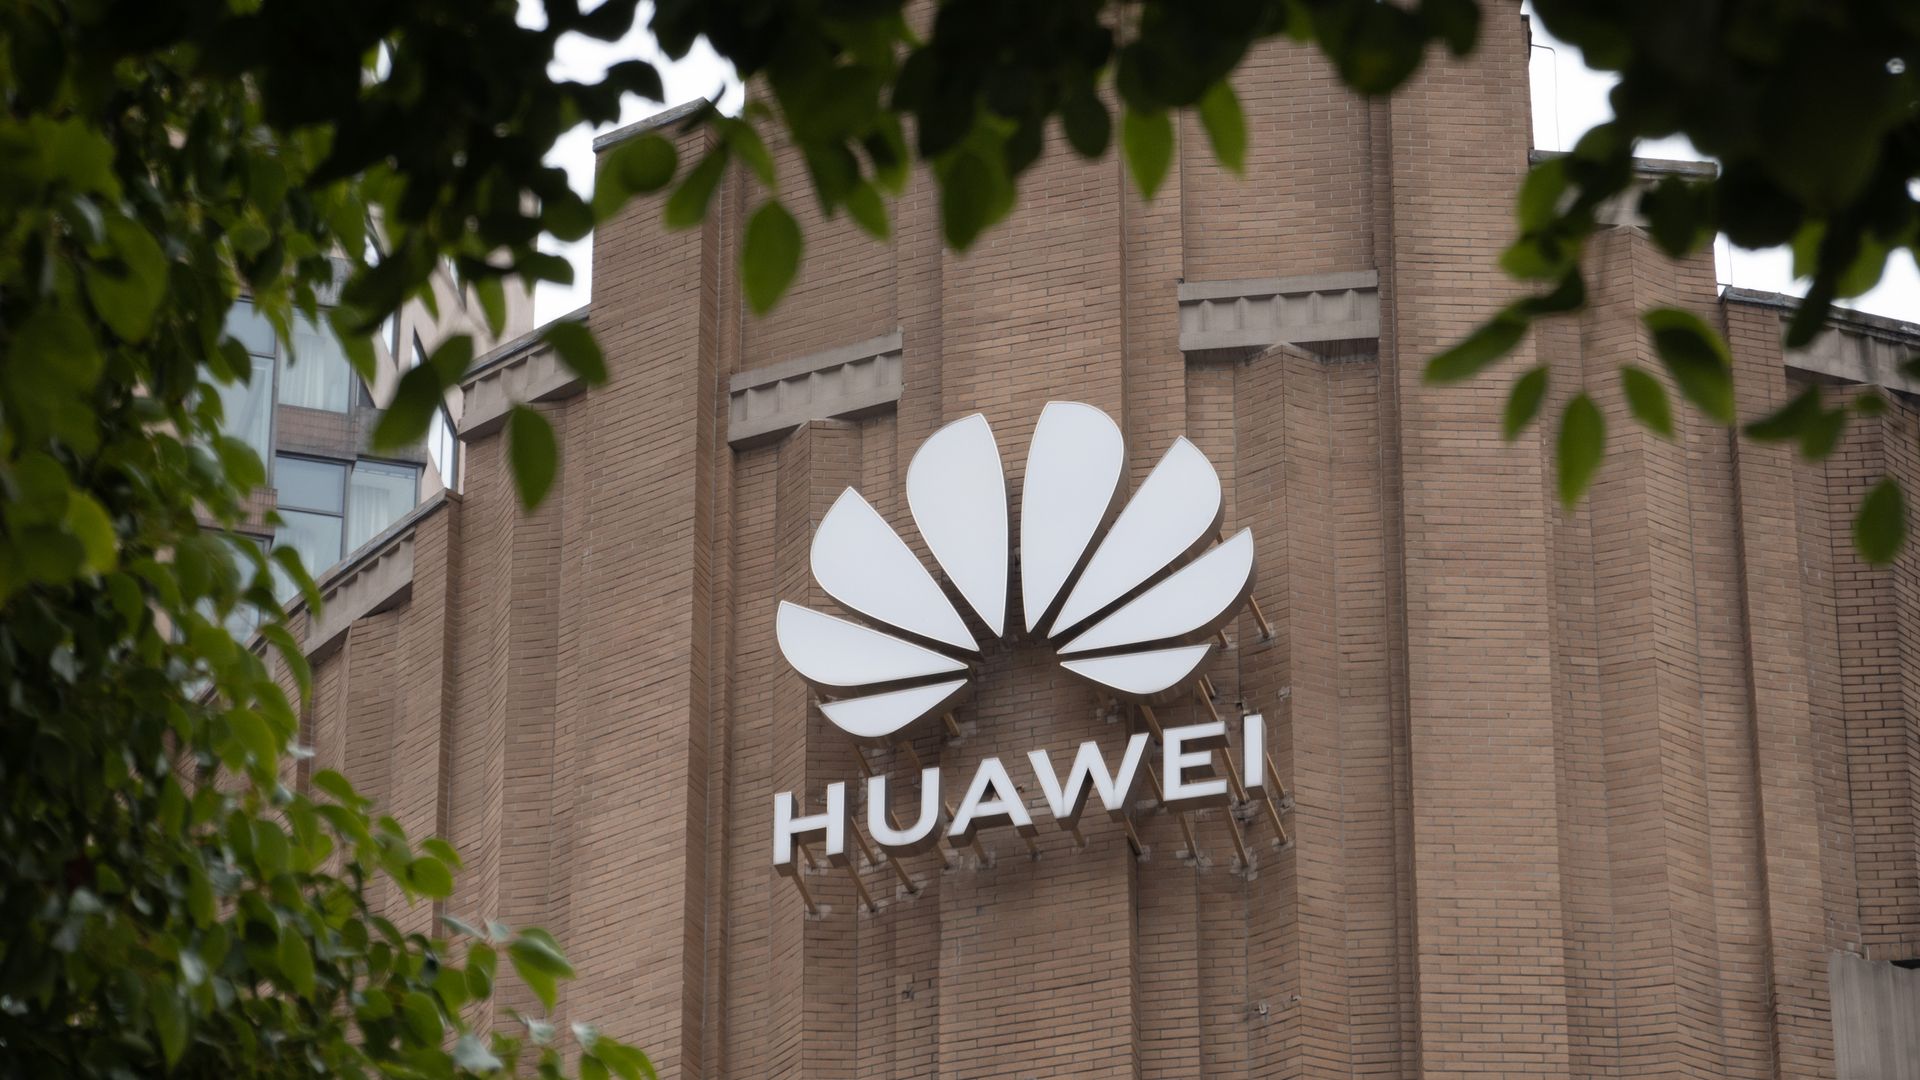 Huawei, the Chinese company often in the crosshairs of rising U.S.-China tensions, released a new smart phone and chip.